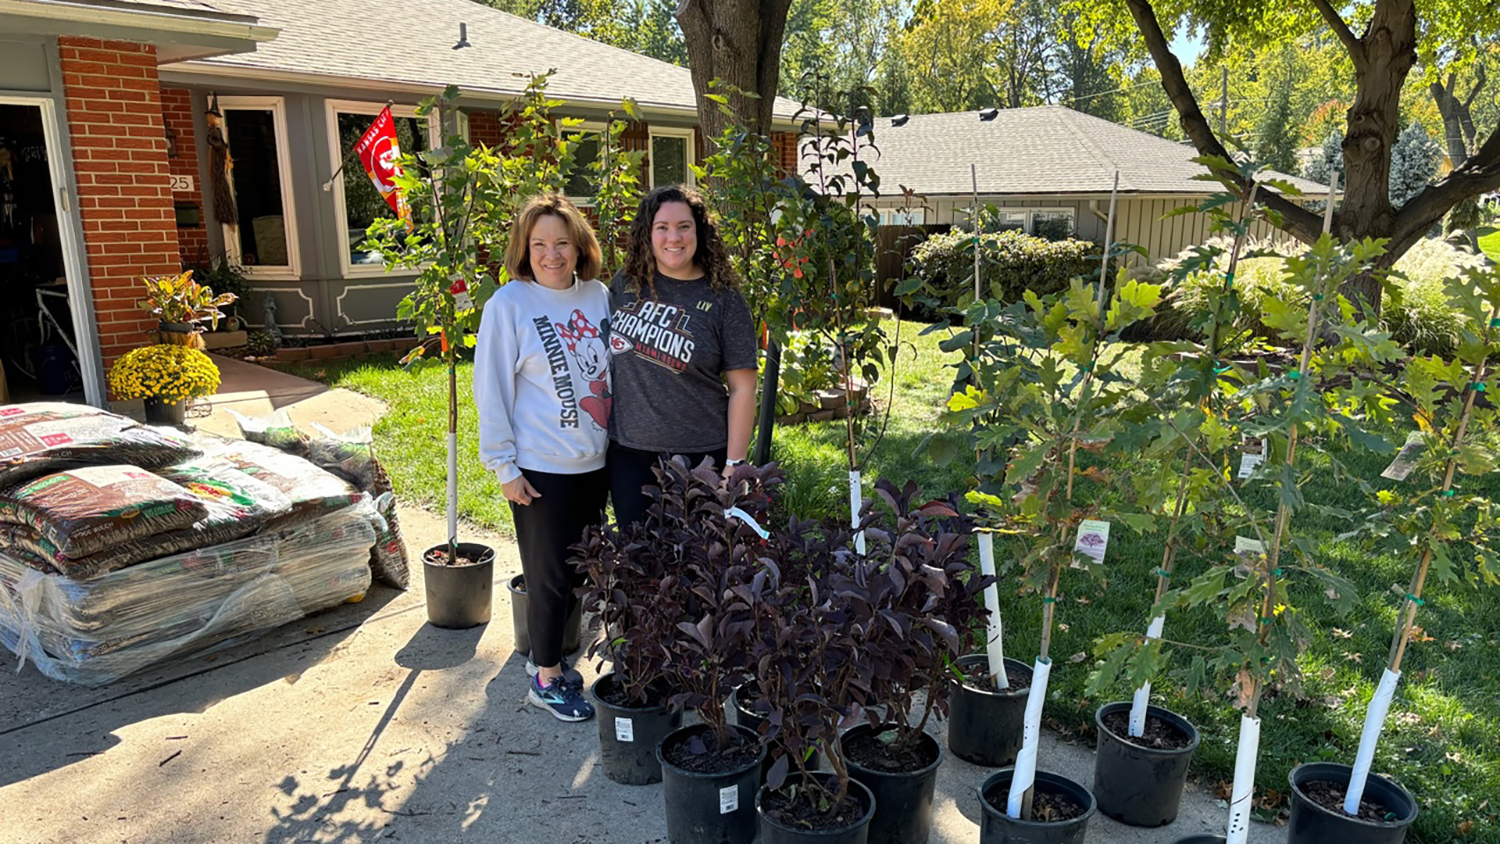 Two neighbors smile and pose next to several potted plants and trees sitting on a driveway.